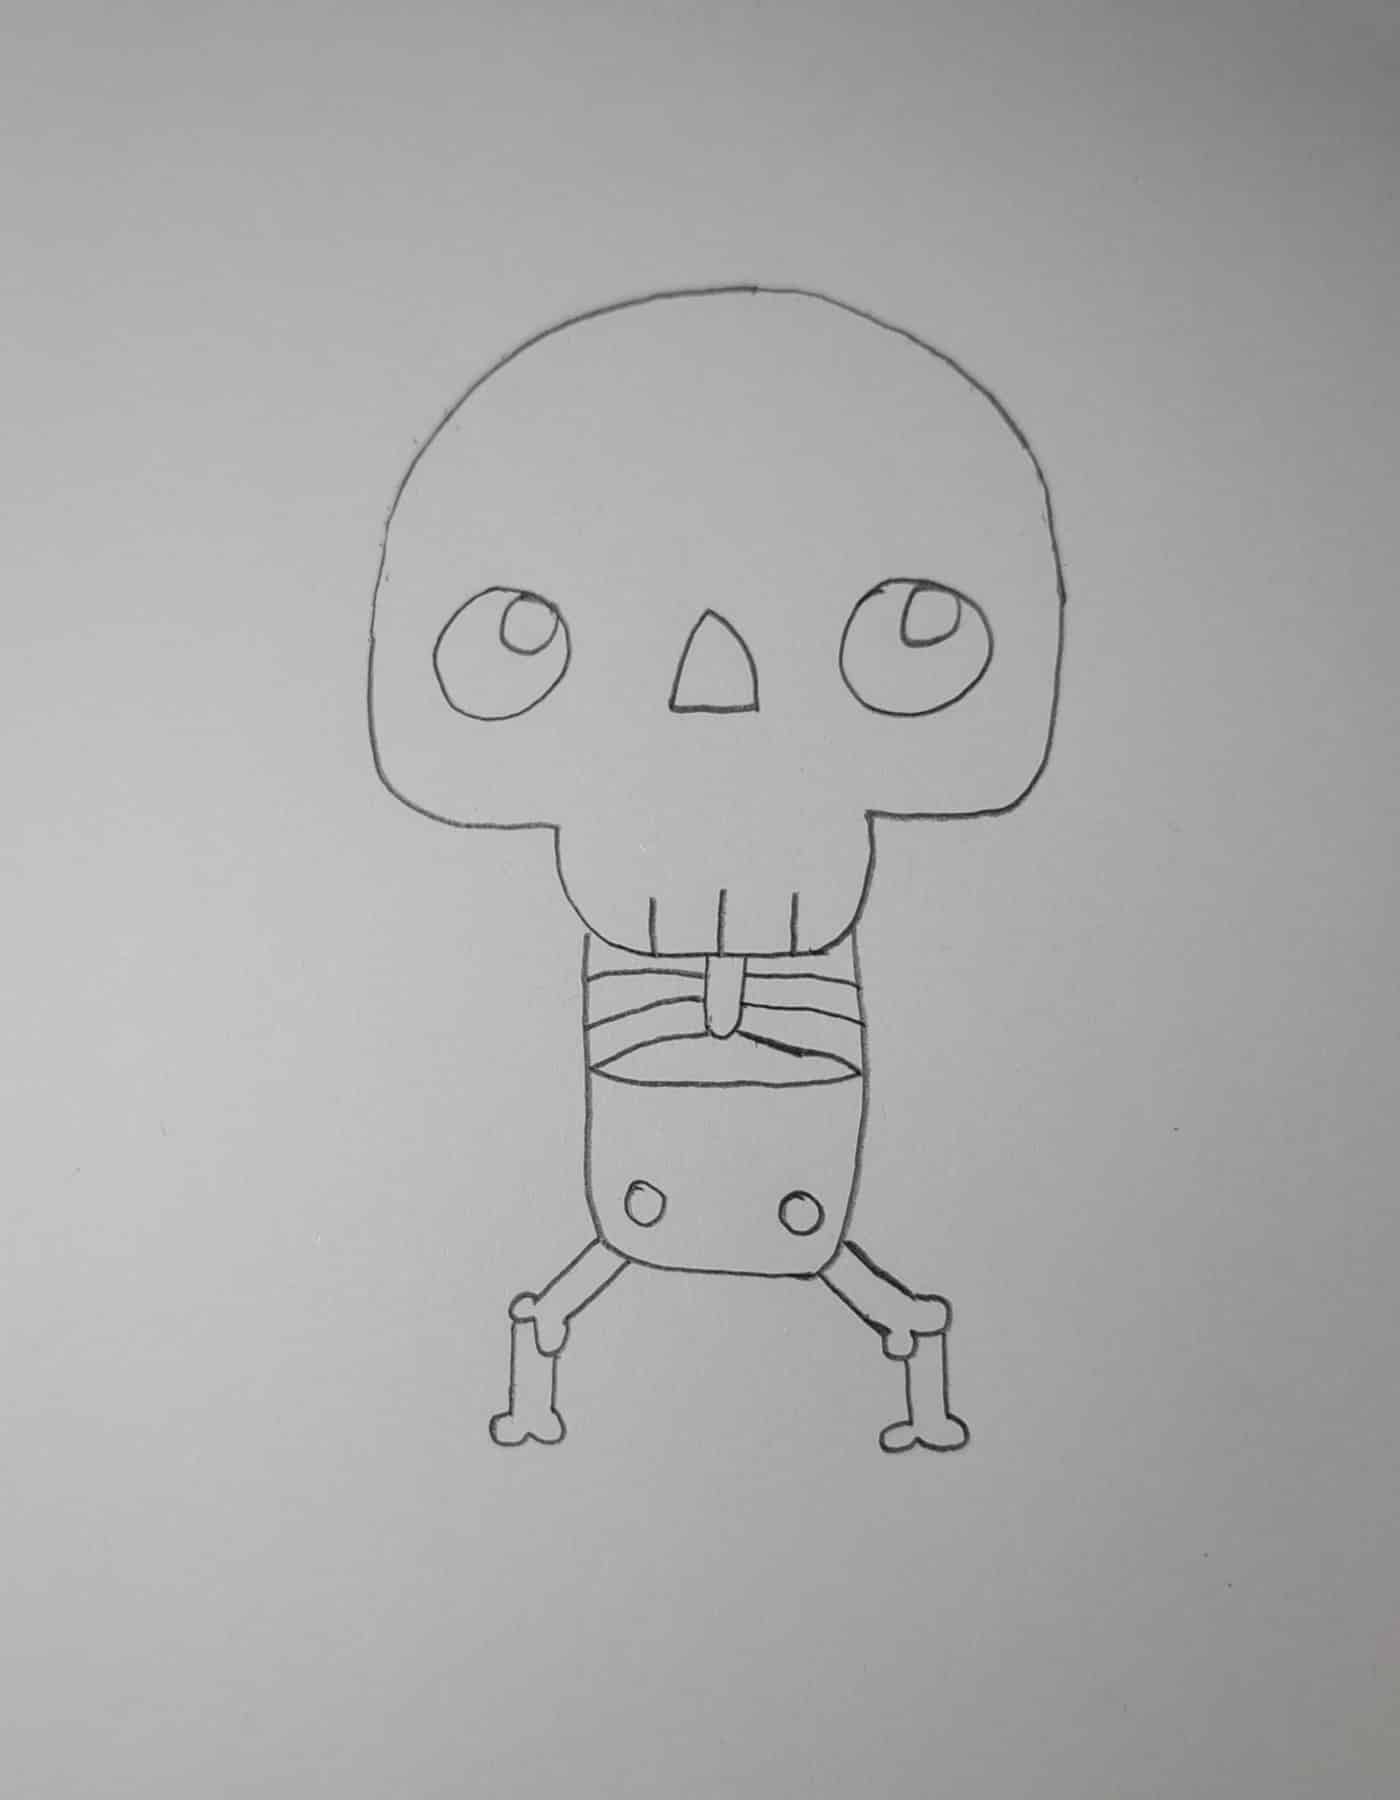 How to Draw a Skeleton Cute for Halloween